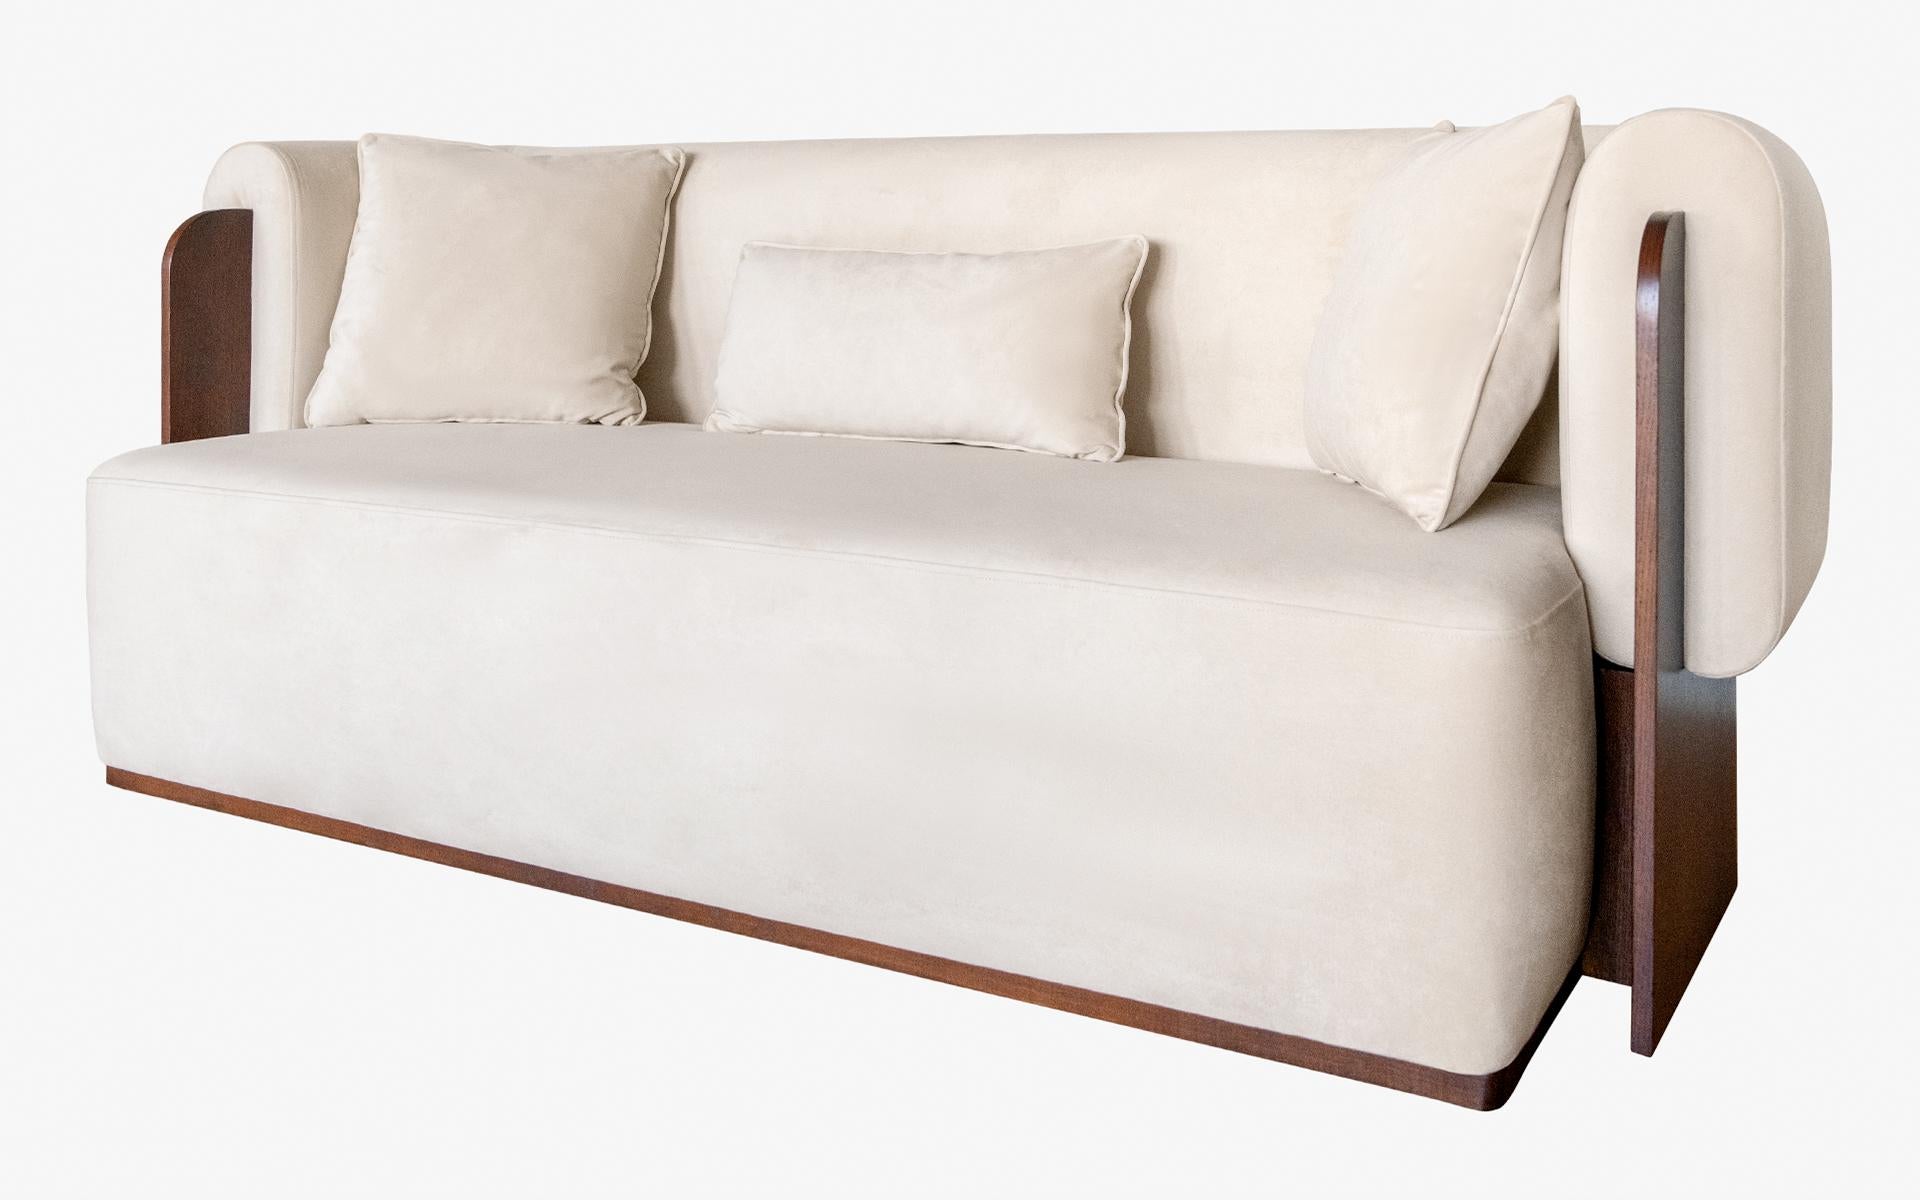 Baika 3 seater sofa, elegantly encased in dark chestnut wood, becomes the most understated yet striking piece in your home. This unique sofa captivates attention with its distinctive design.

With its soft seat cushions and comfortable backrest,